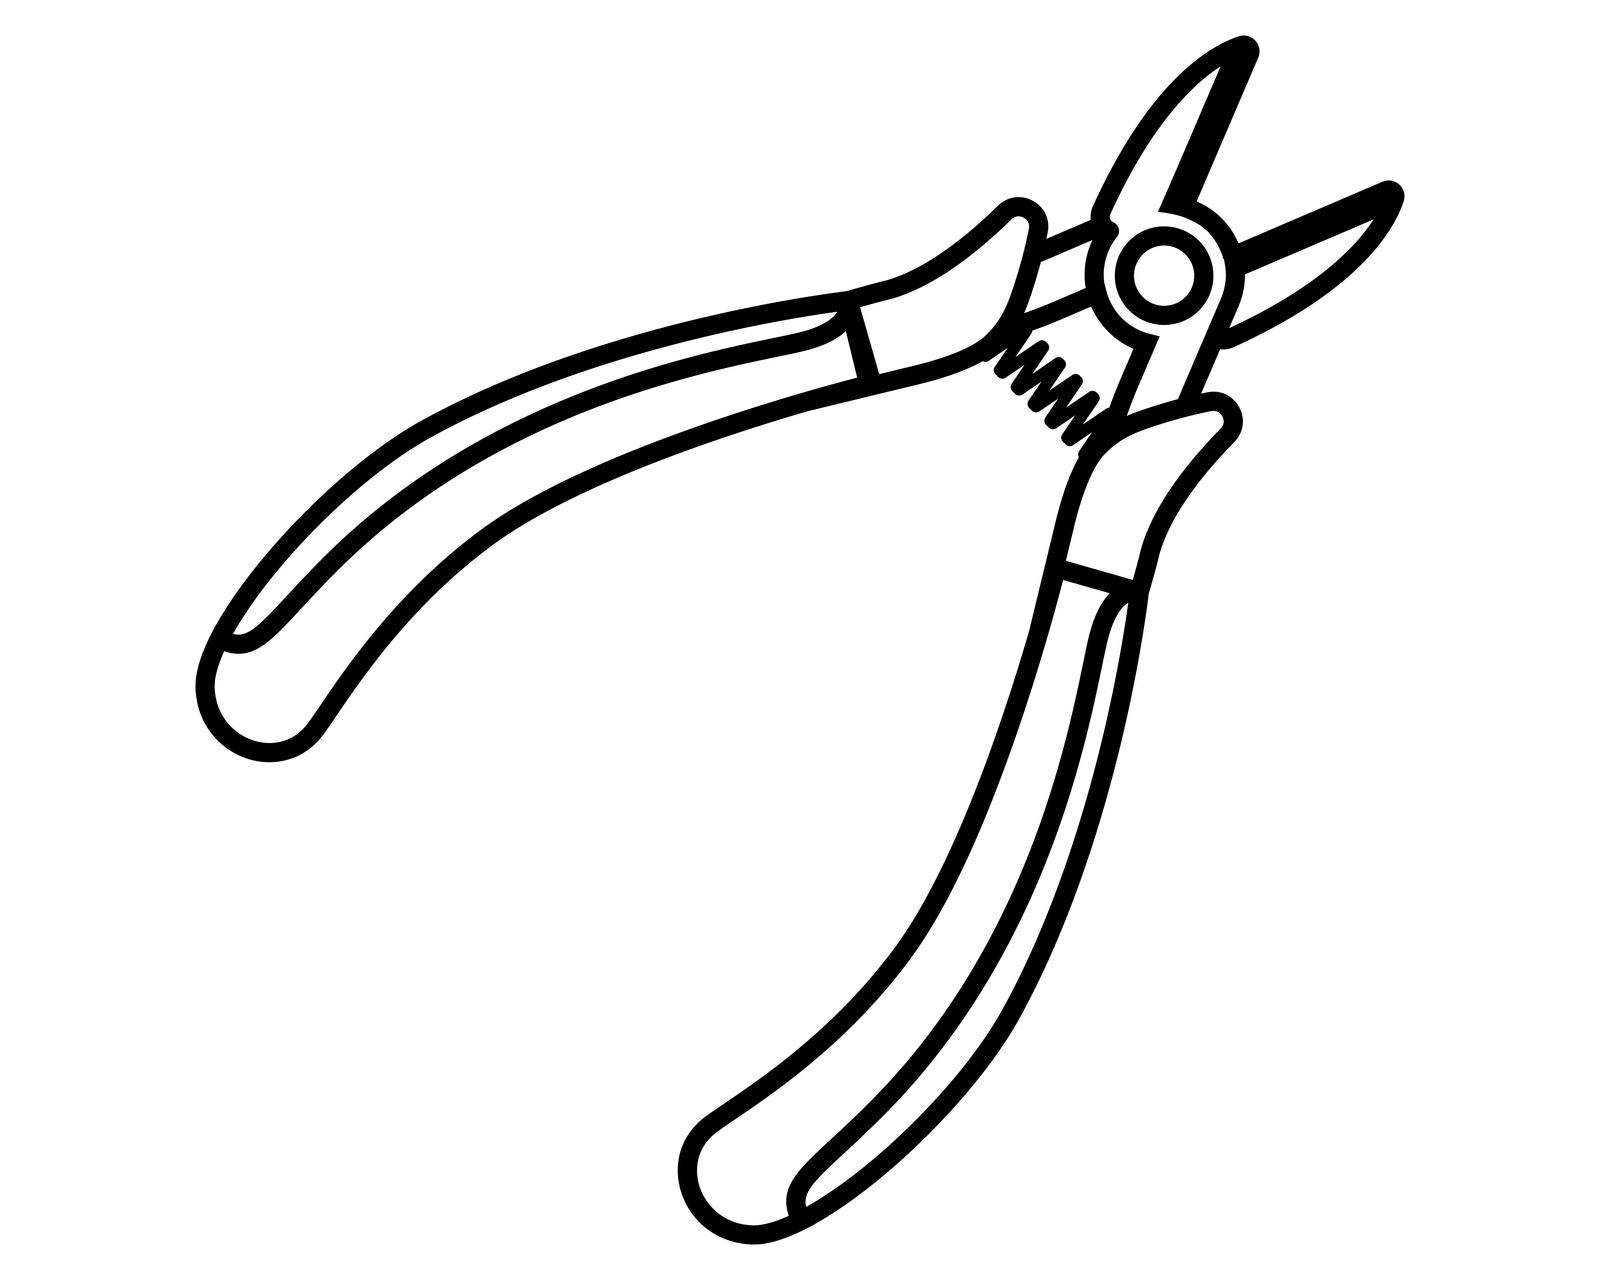 black linear icon construction cable cutting pliers. flat vector illustration.